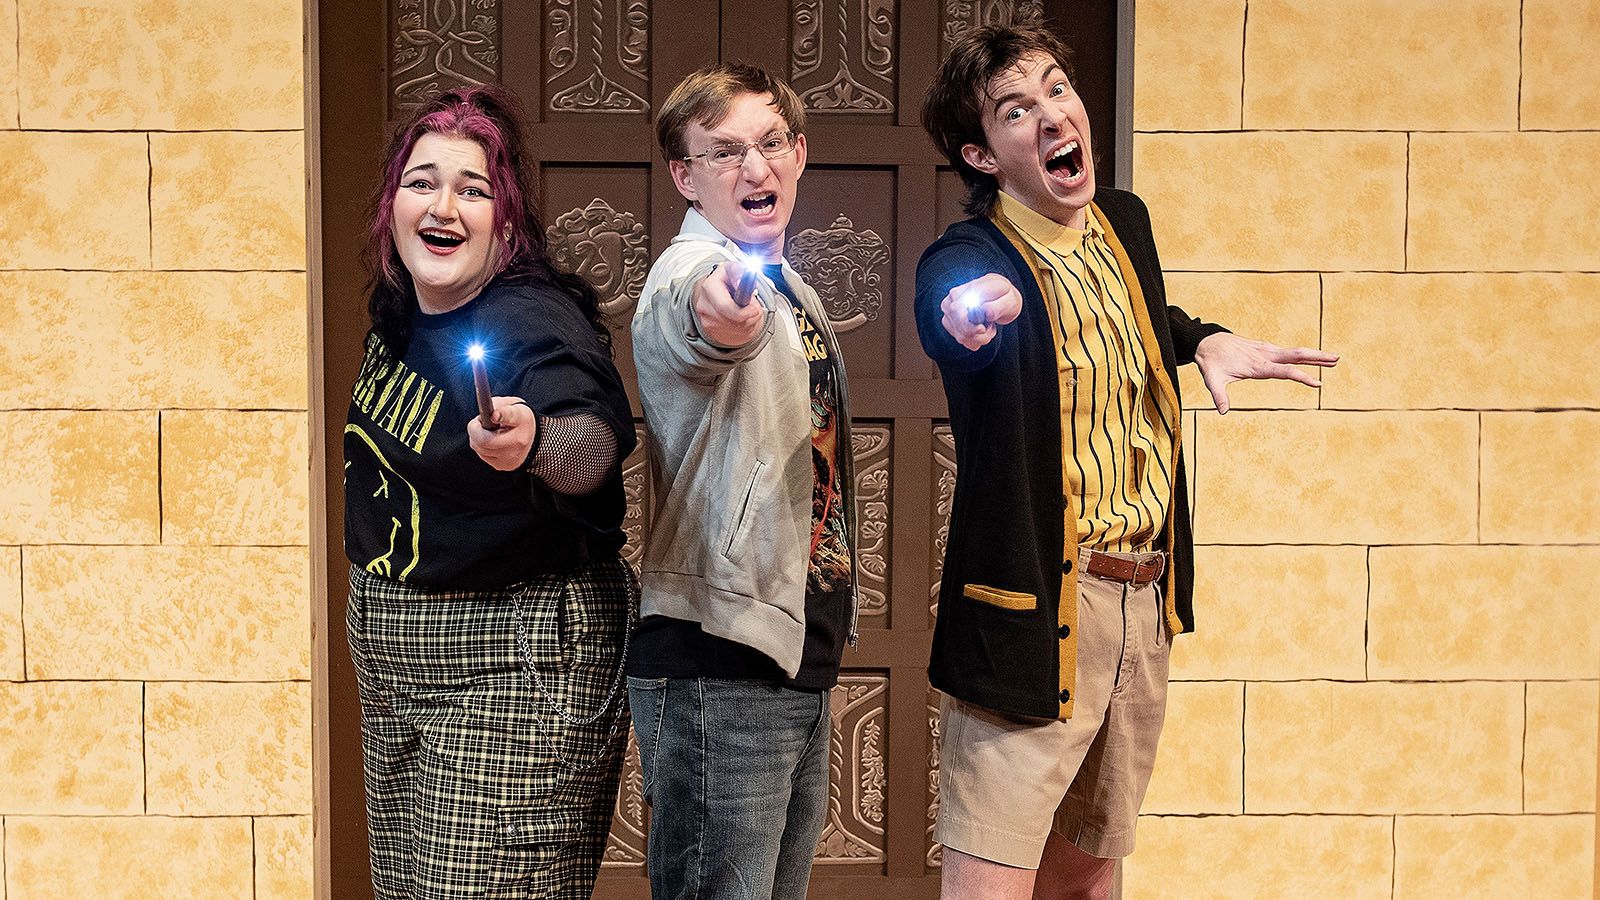 There are opportunities to catch Purdue Fort Wayne’s production of Puffs, or Seven Increasingly Eventful Years at a Certain School of Magic and Magic. The play stars, from left, Lori Ulick, Evan Snaufer, and Gabriel Reed.